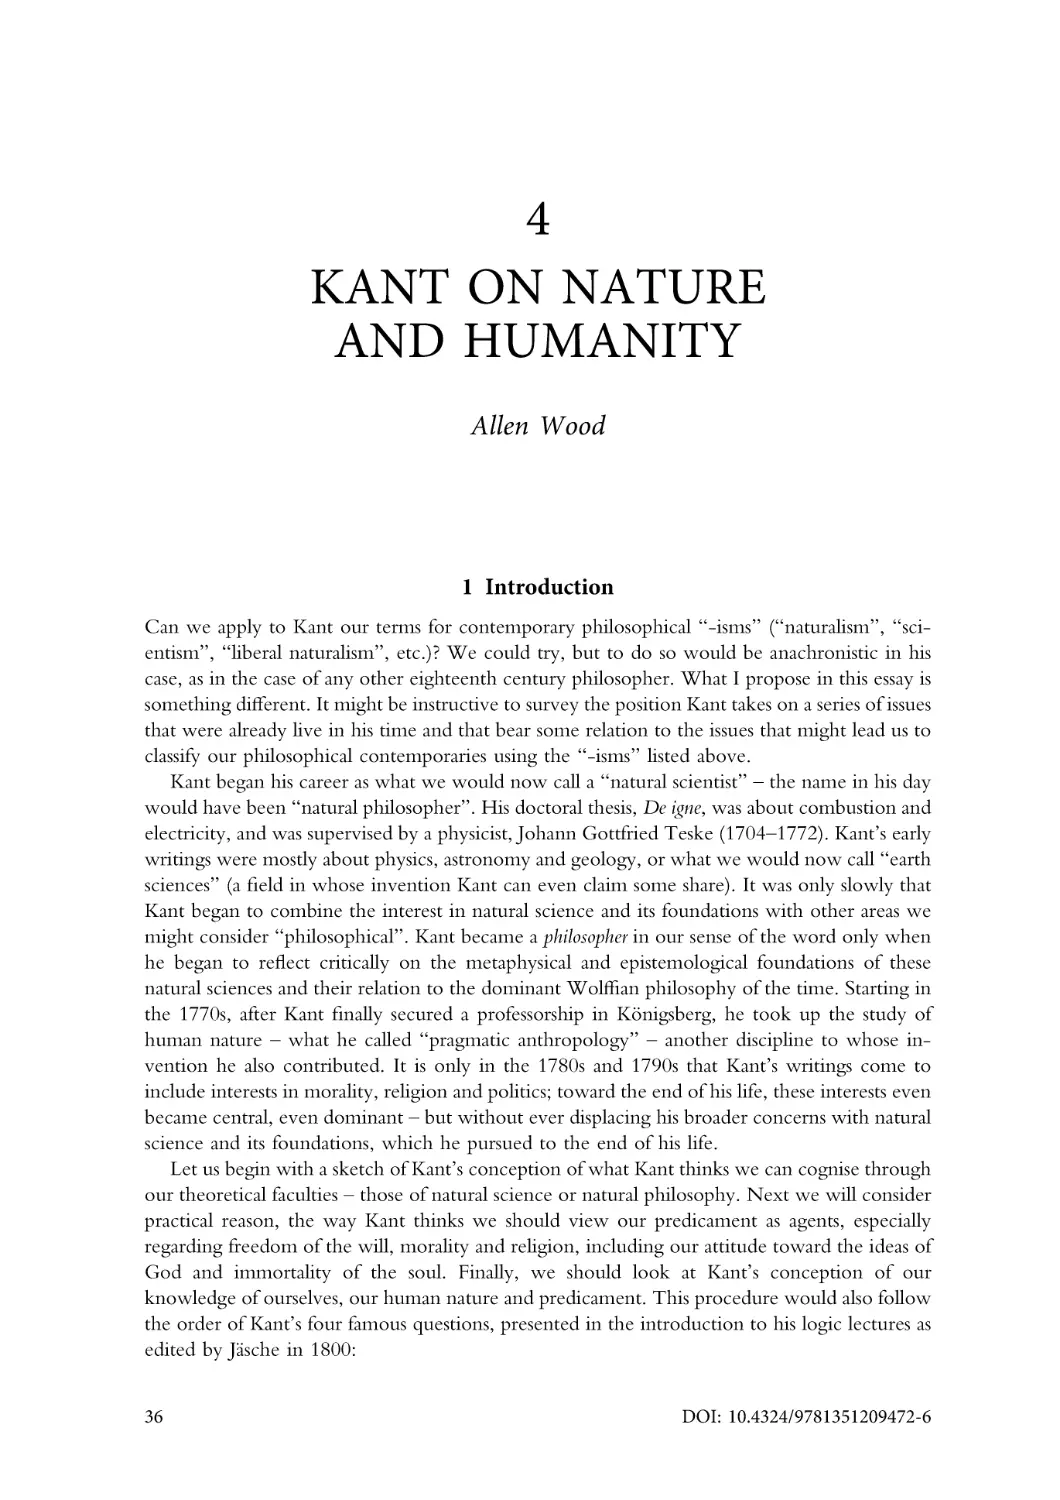 4. Kant on nature and humanity
1. Introduction